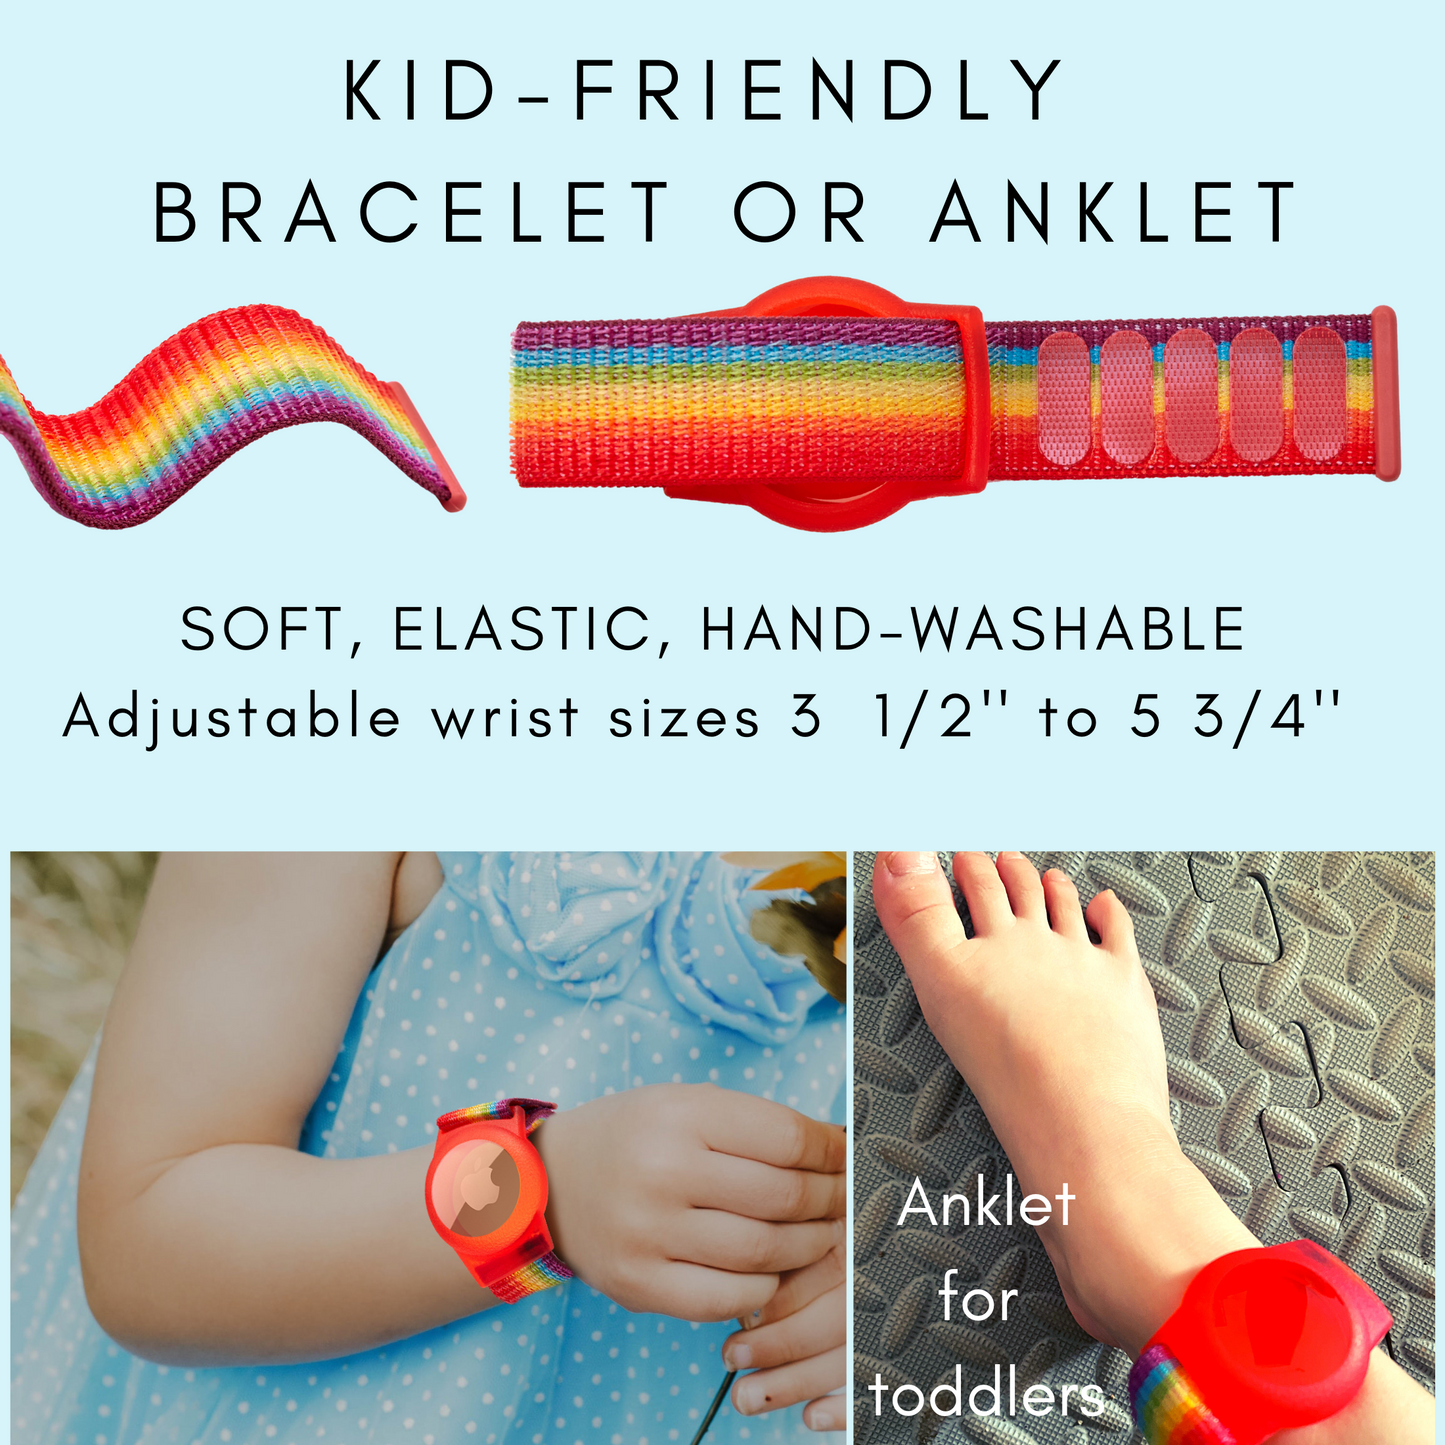 CHABAEBAE Airtag Necklace & Airtag Bracelet For Kids, Air Tag Anklet For Toddlers, Plus Stickers